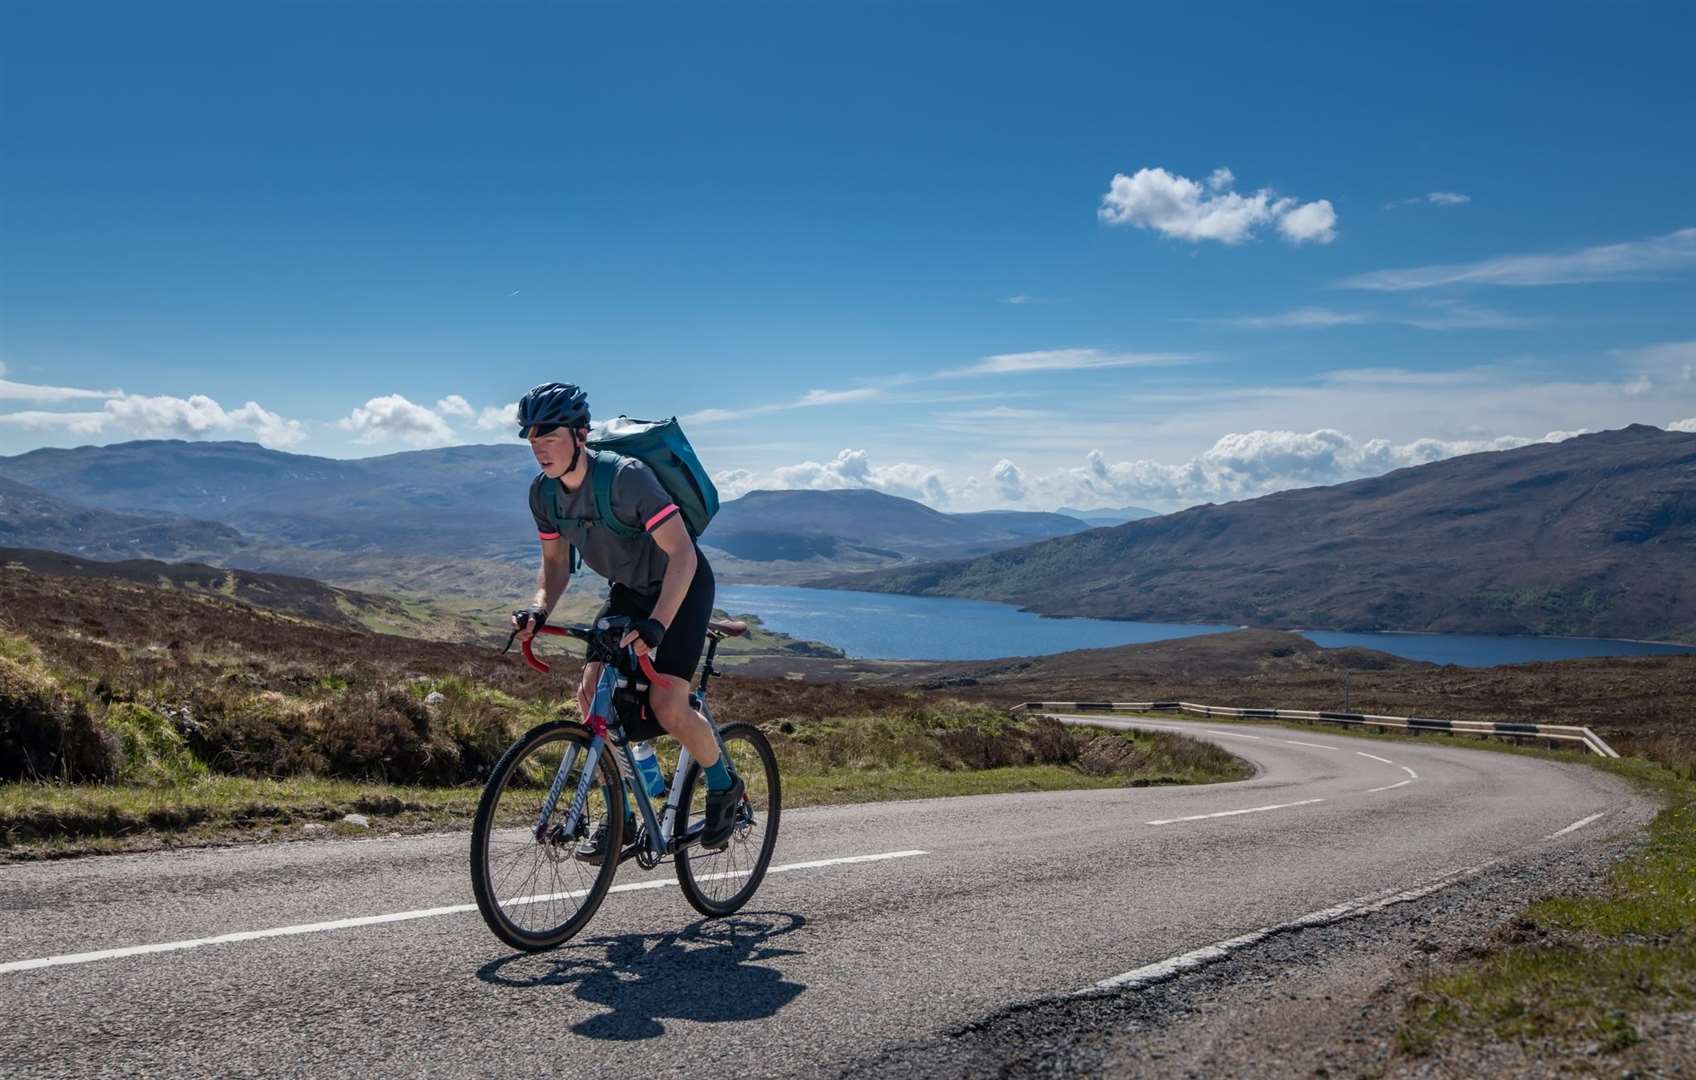 Discover Scotland 2022 aims to encourage visitors to rediscover the Highlands now that pandemic restrictions have lifted. Picture: Liam Anderstrem